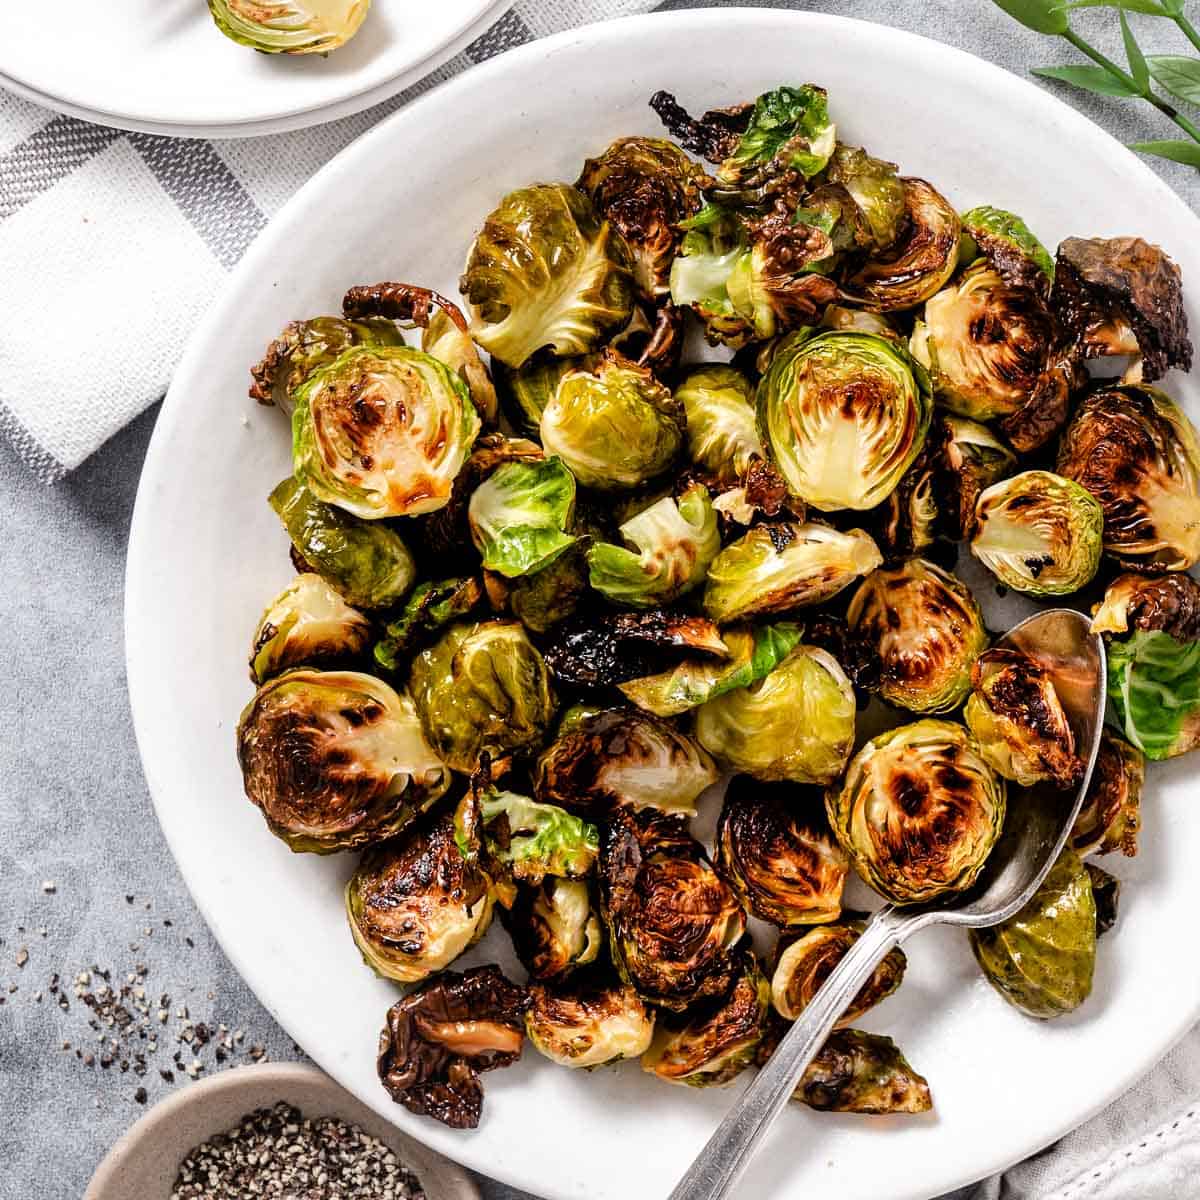 how many brussel sprouts per person